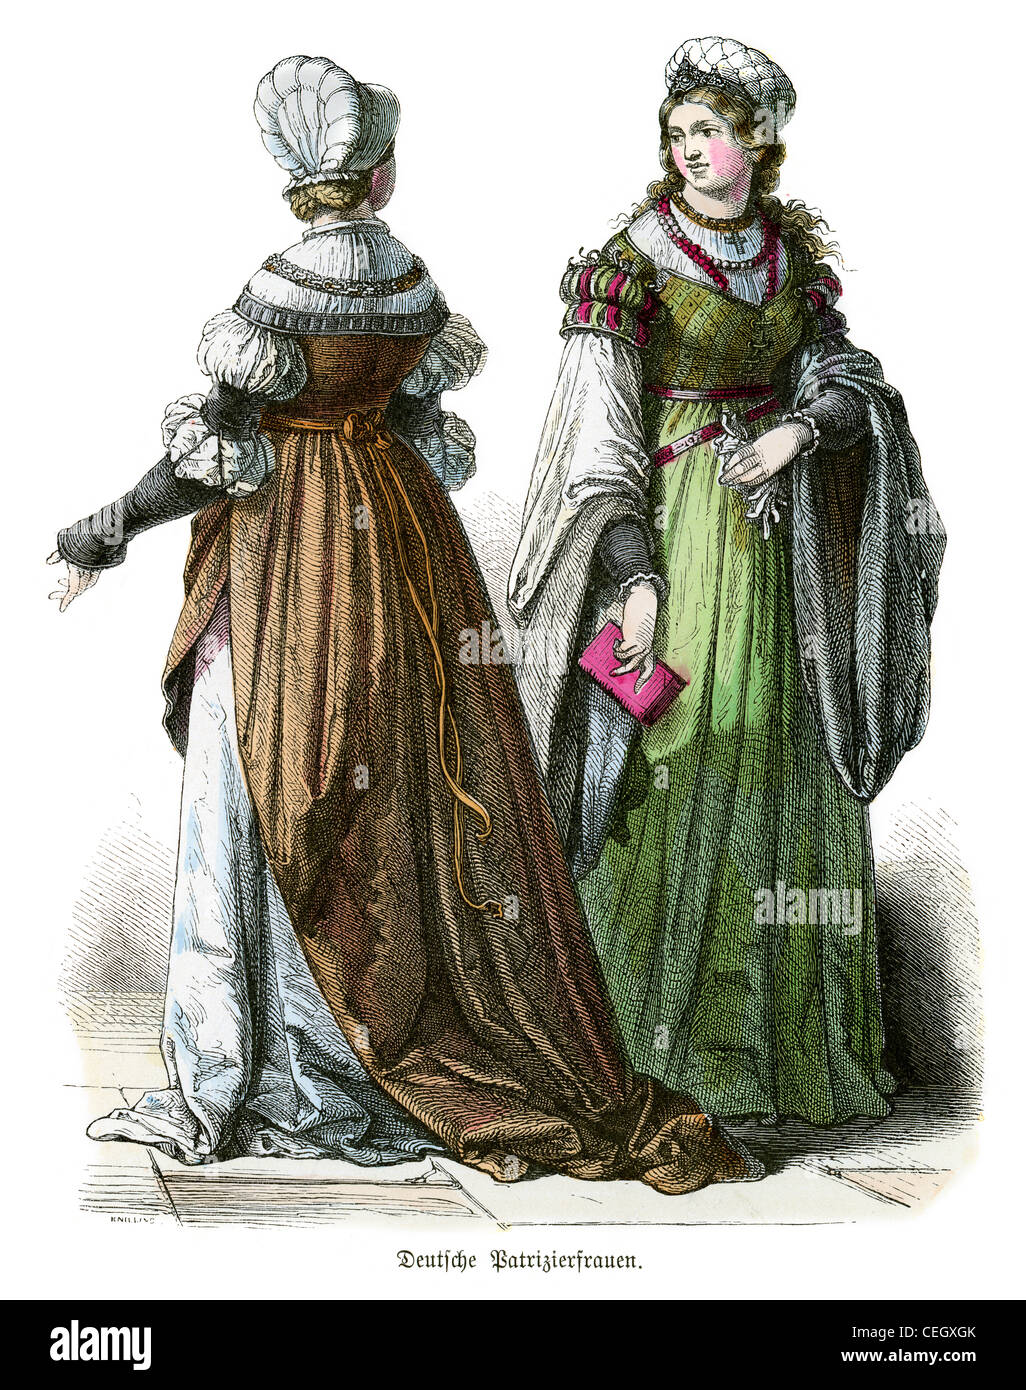 A couple of German patrician women in period fashion from the 16th century Stock Photo